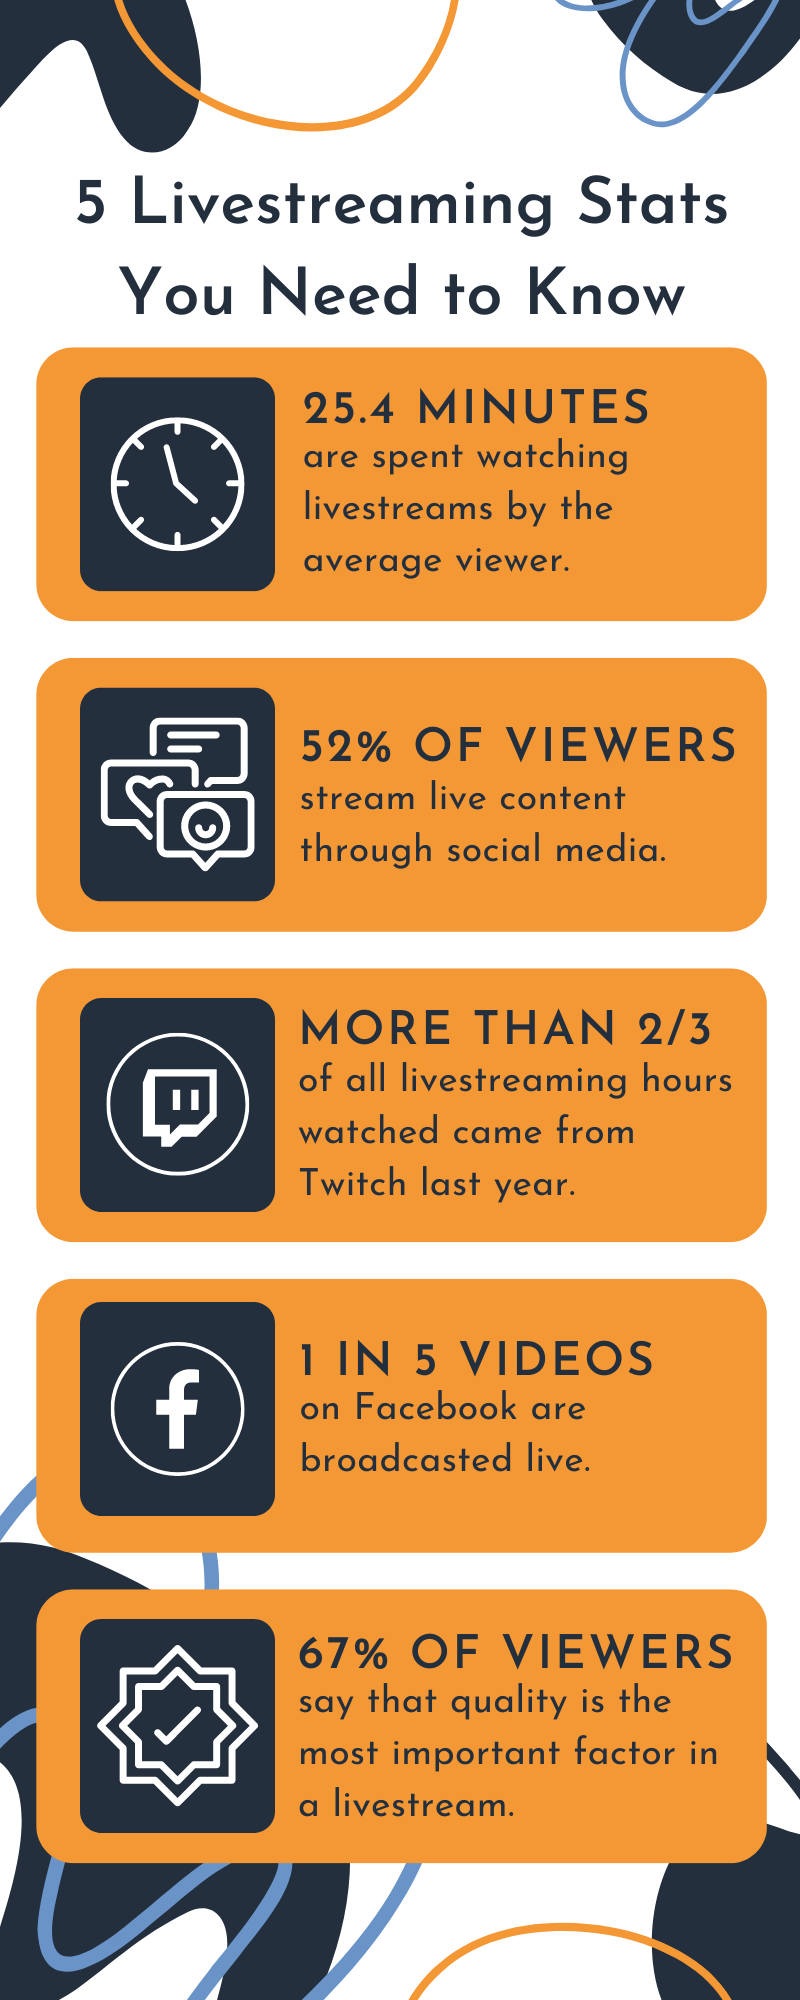 5 Livestreaming Stats You Need to Know